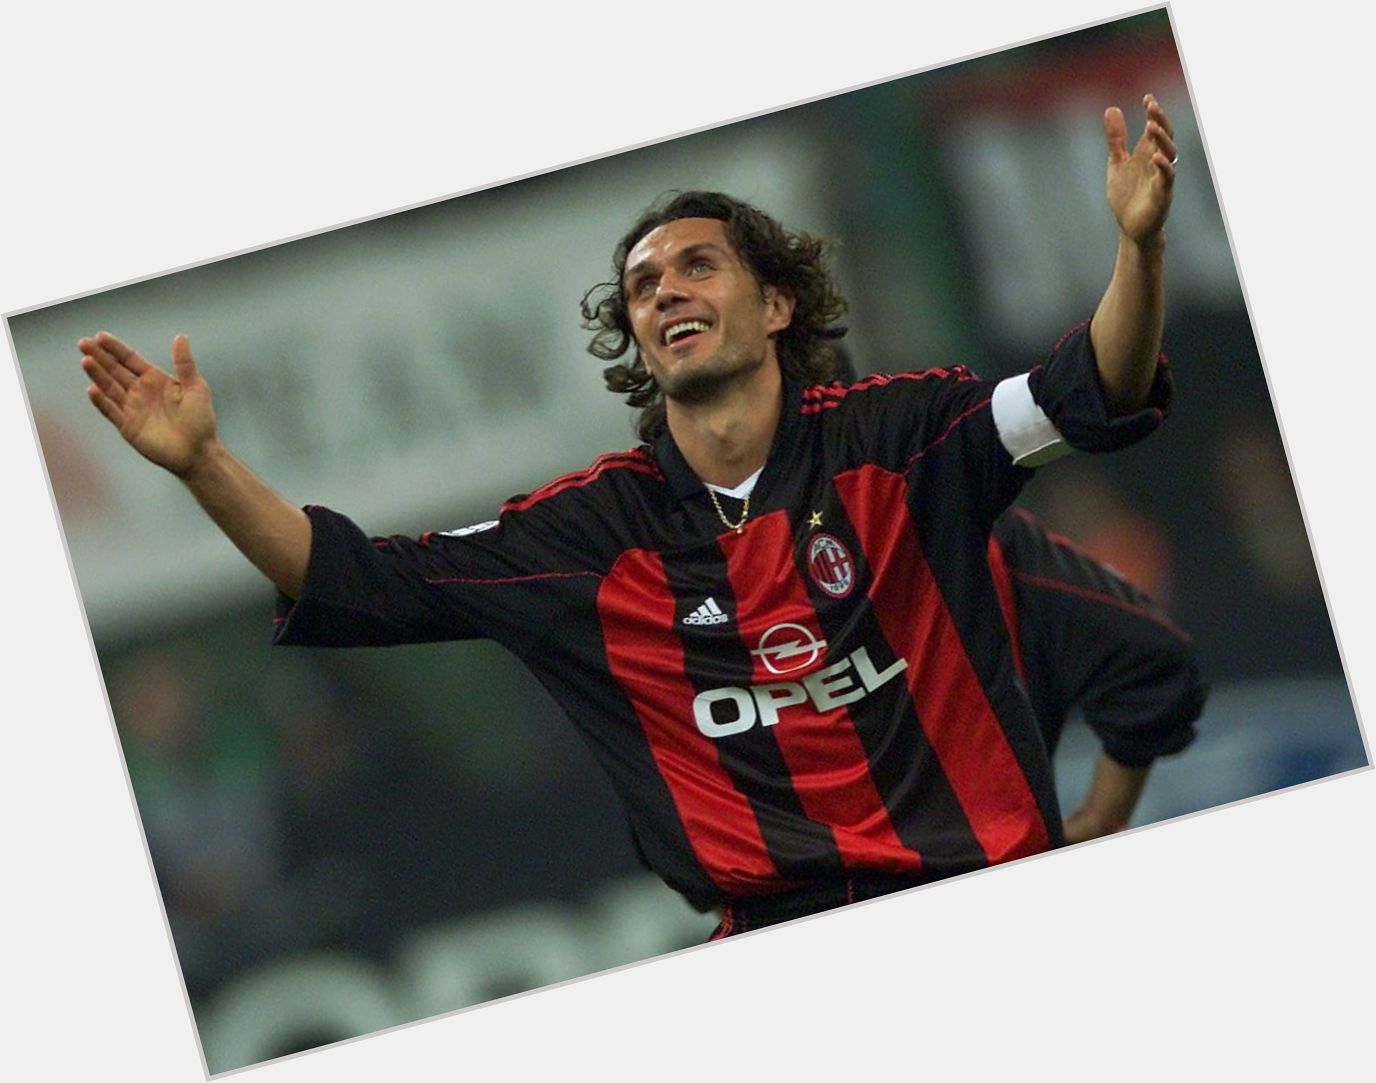 Happy birthday to AC Milan and Italy legend Paolo Maldini, who turns 49 today! 